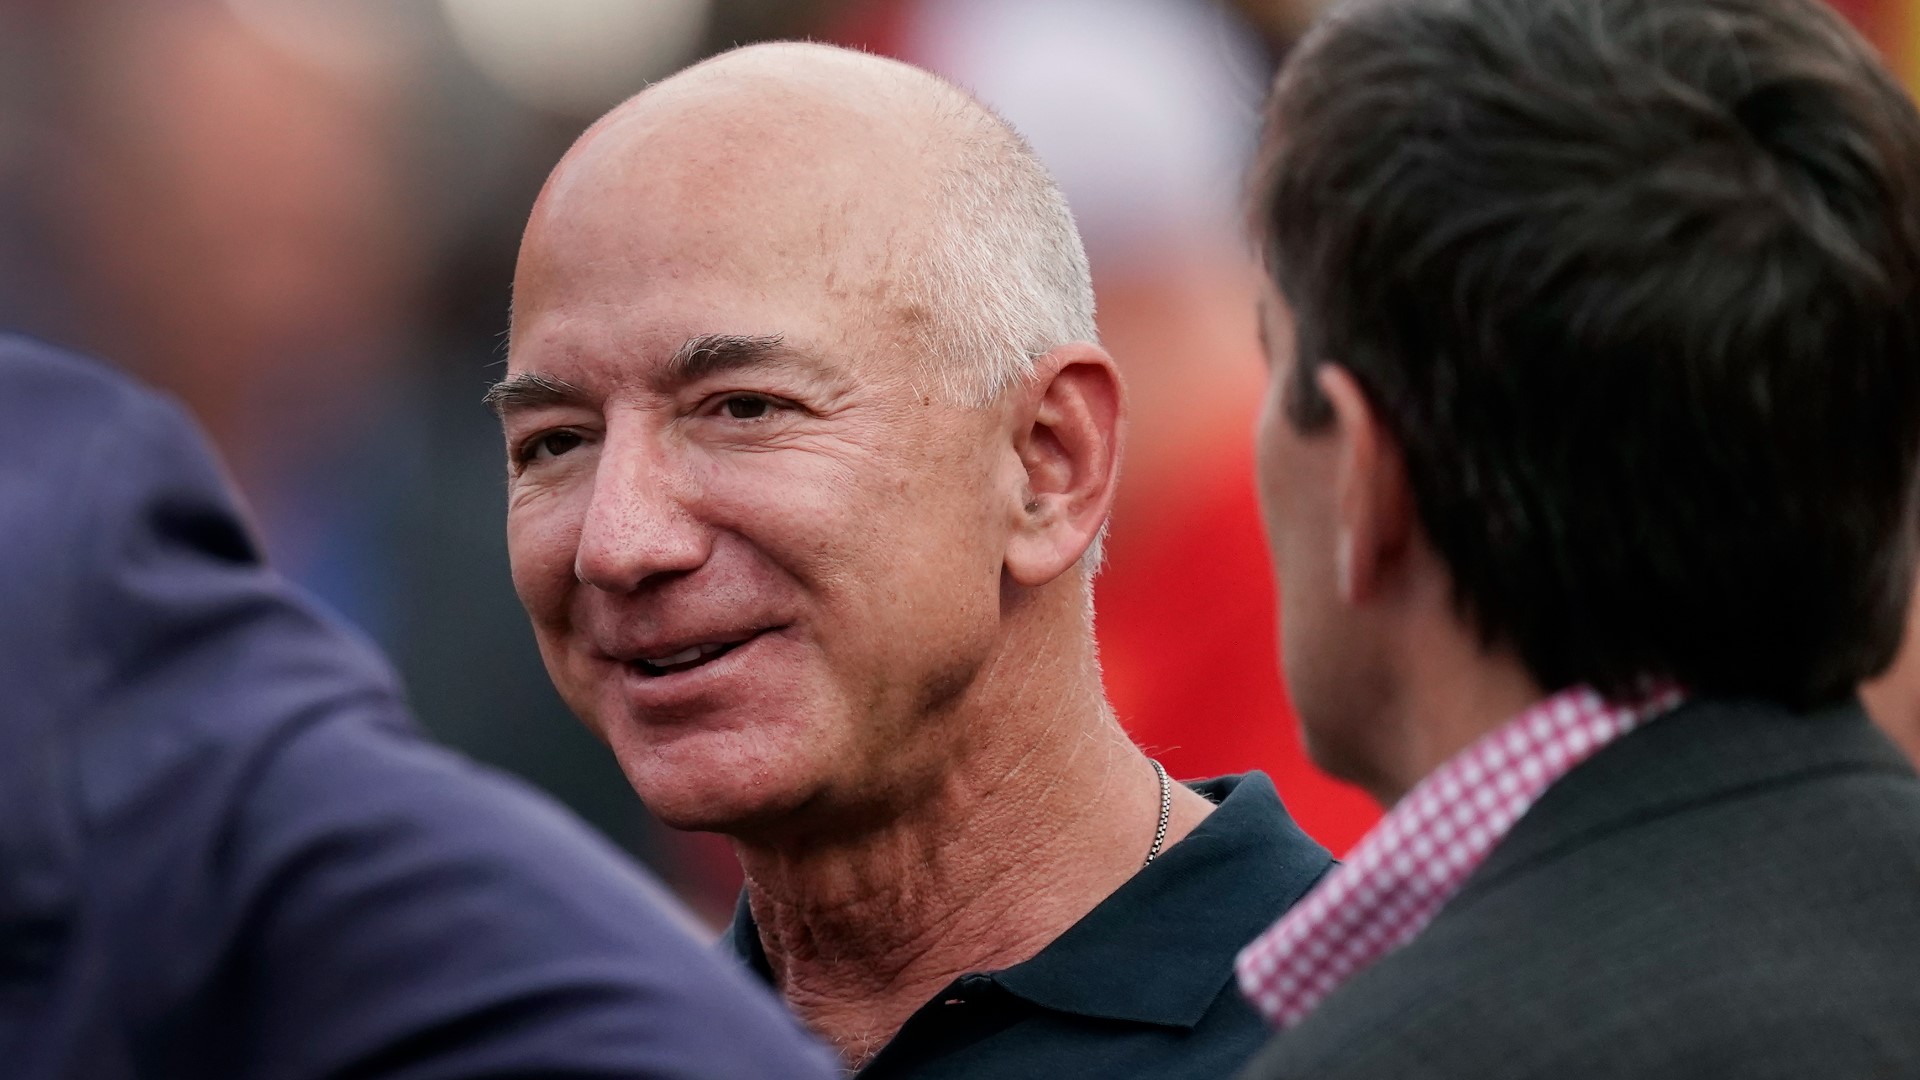 In a Thursday night Instagram post, the 59-year-old Bezos announced plans to return to Miami — where he spent his high school years.